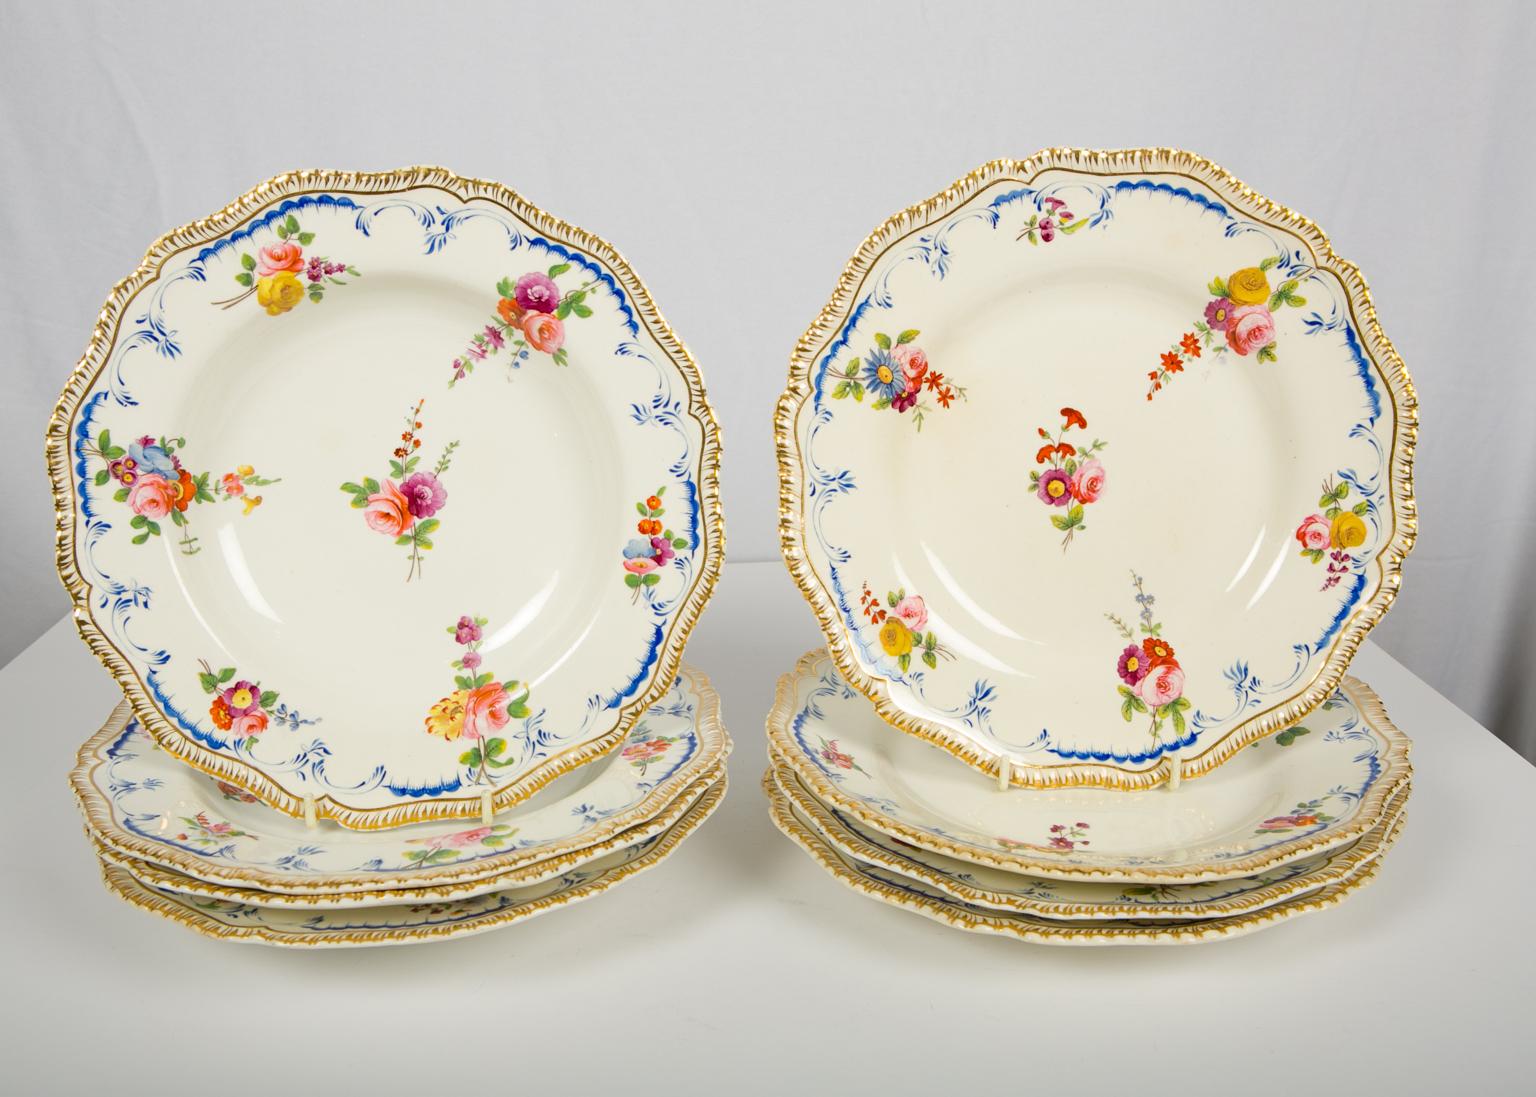 Porcelain Set of Four Antique Dinner Plates Made by Coalport in the Early 19th Century